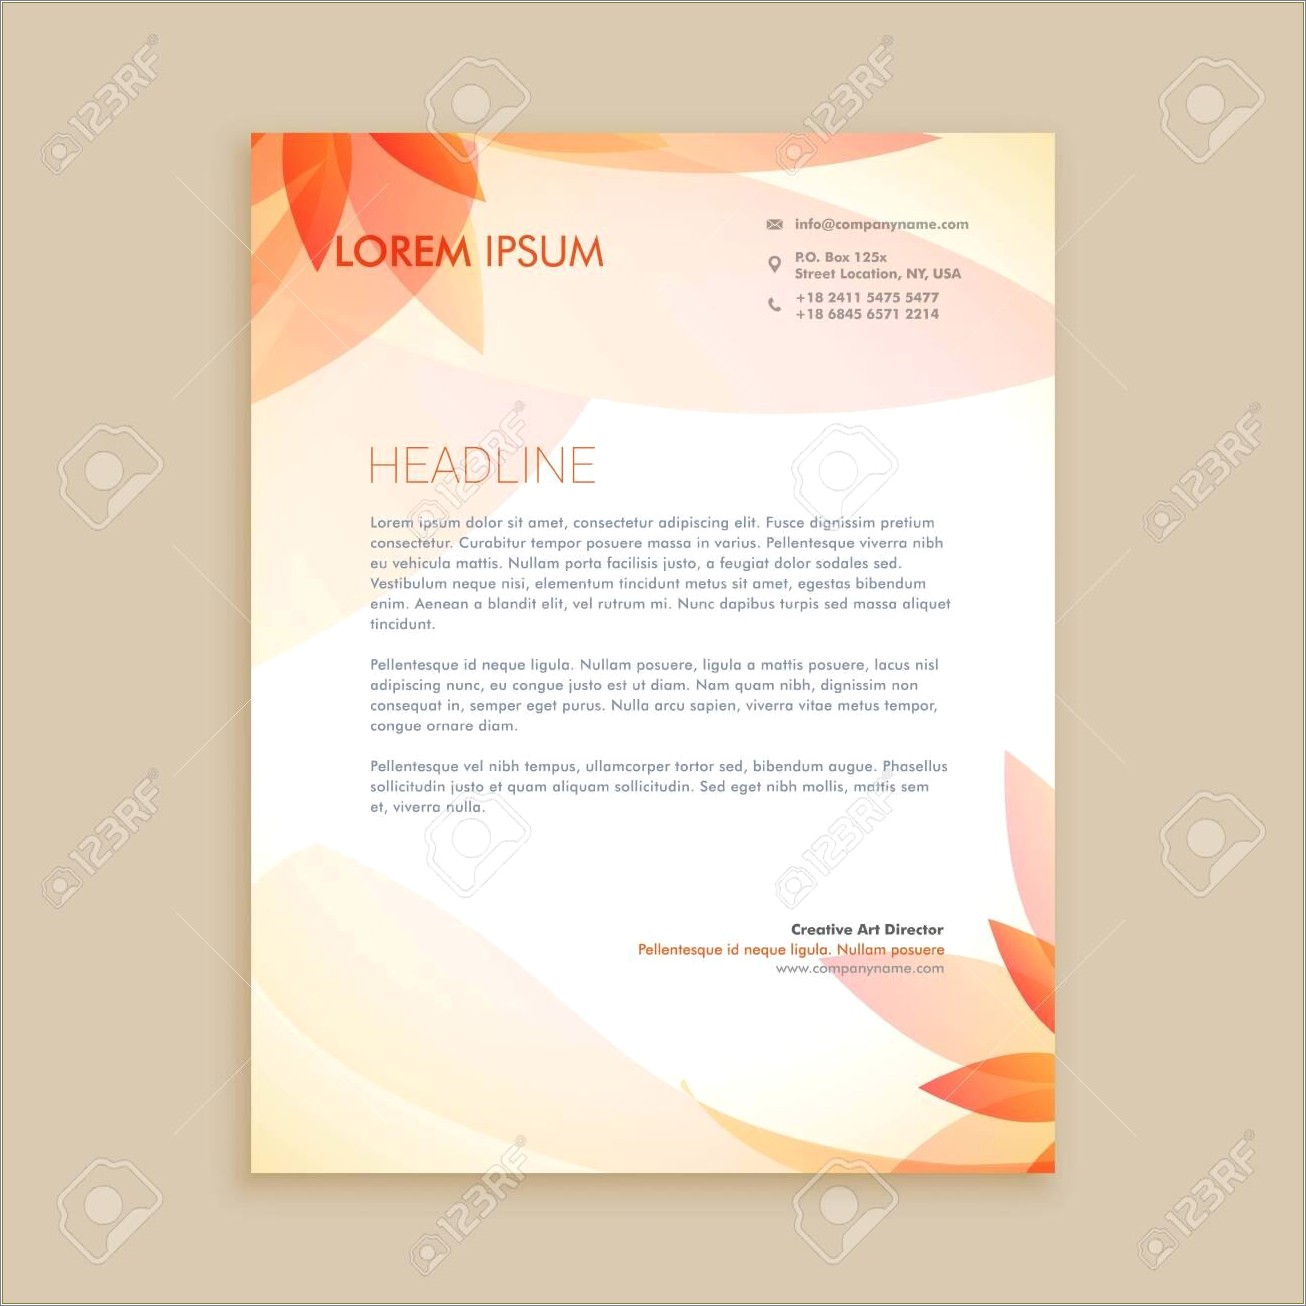 Free Download Vector Business Letterhead Template